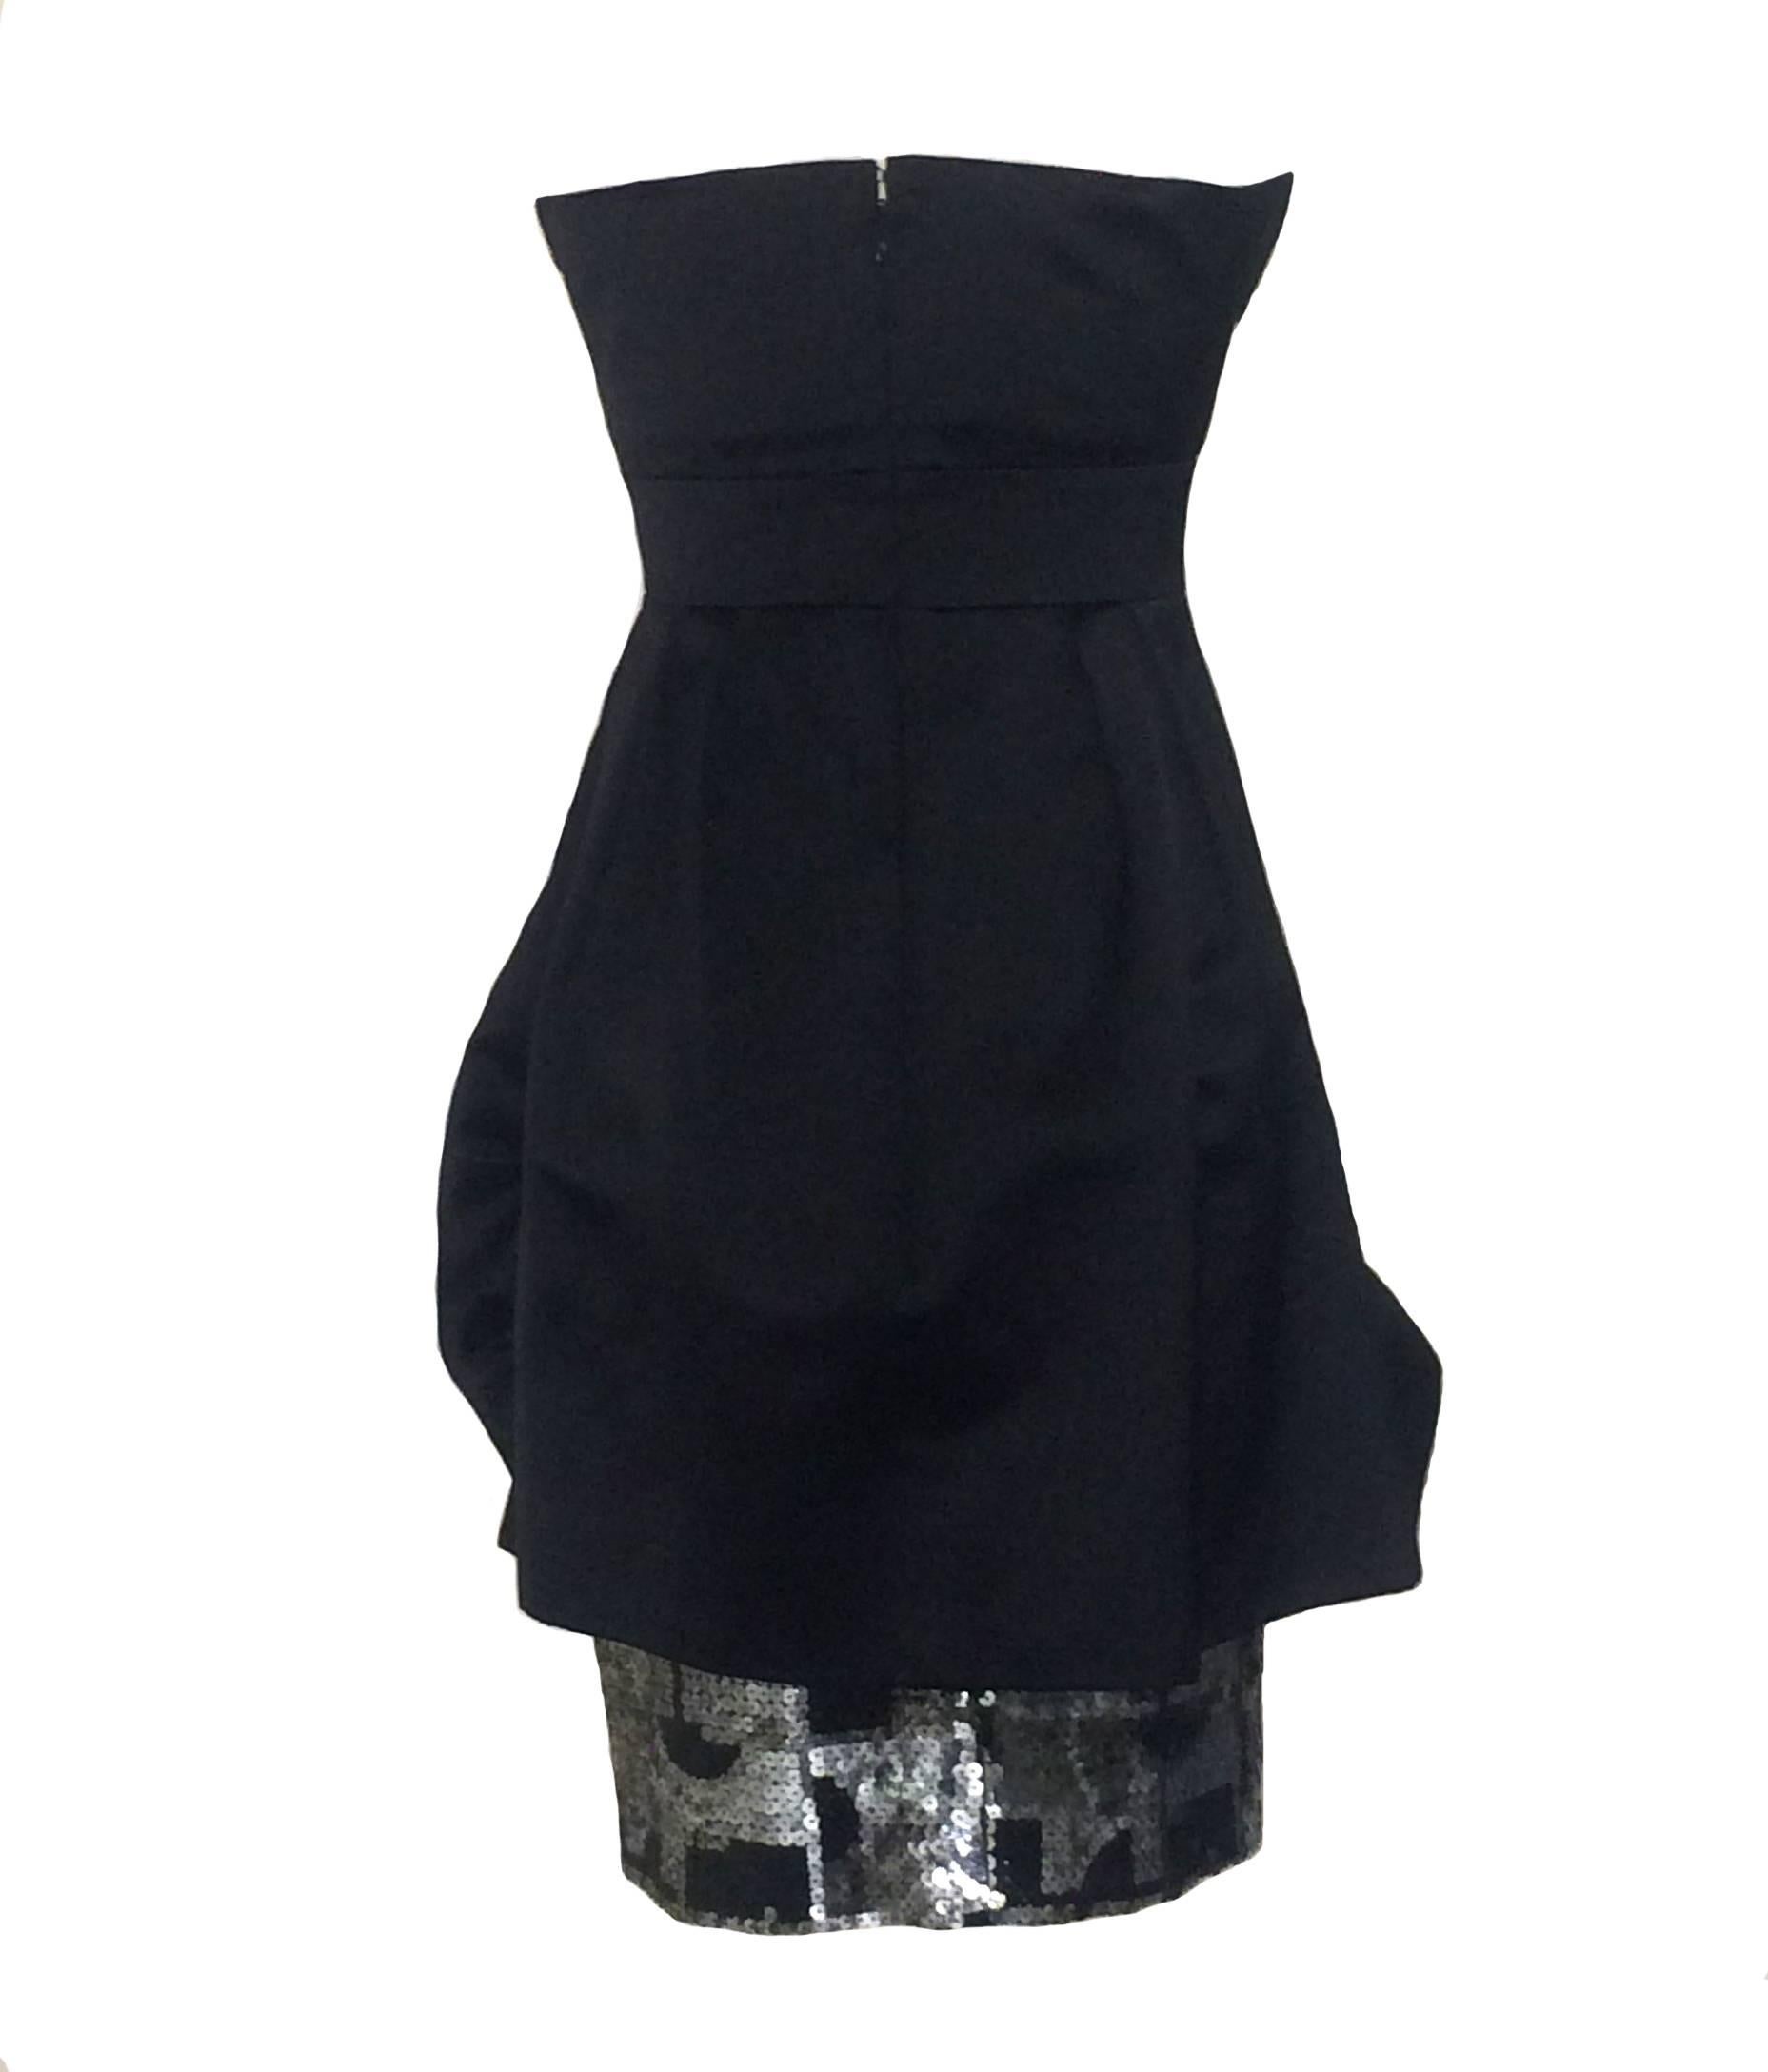 Christian Lacroix black silk draped bubble skirt cocktail dress with geometric silver and black sequin trim peeking out from skirt and on one side of top chest. Very thin spaghetti straps that can be worn or tucked in. Back zip and hook and eye.